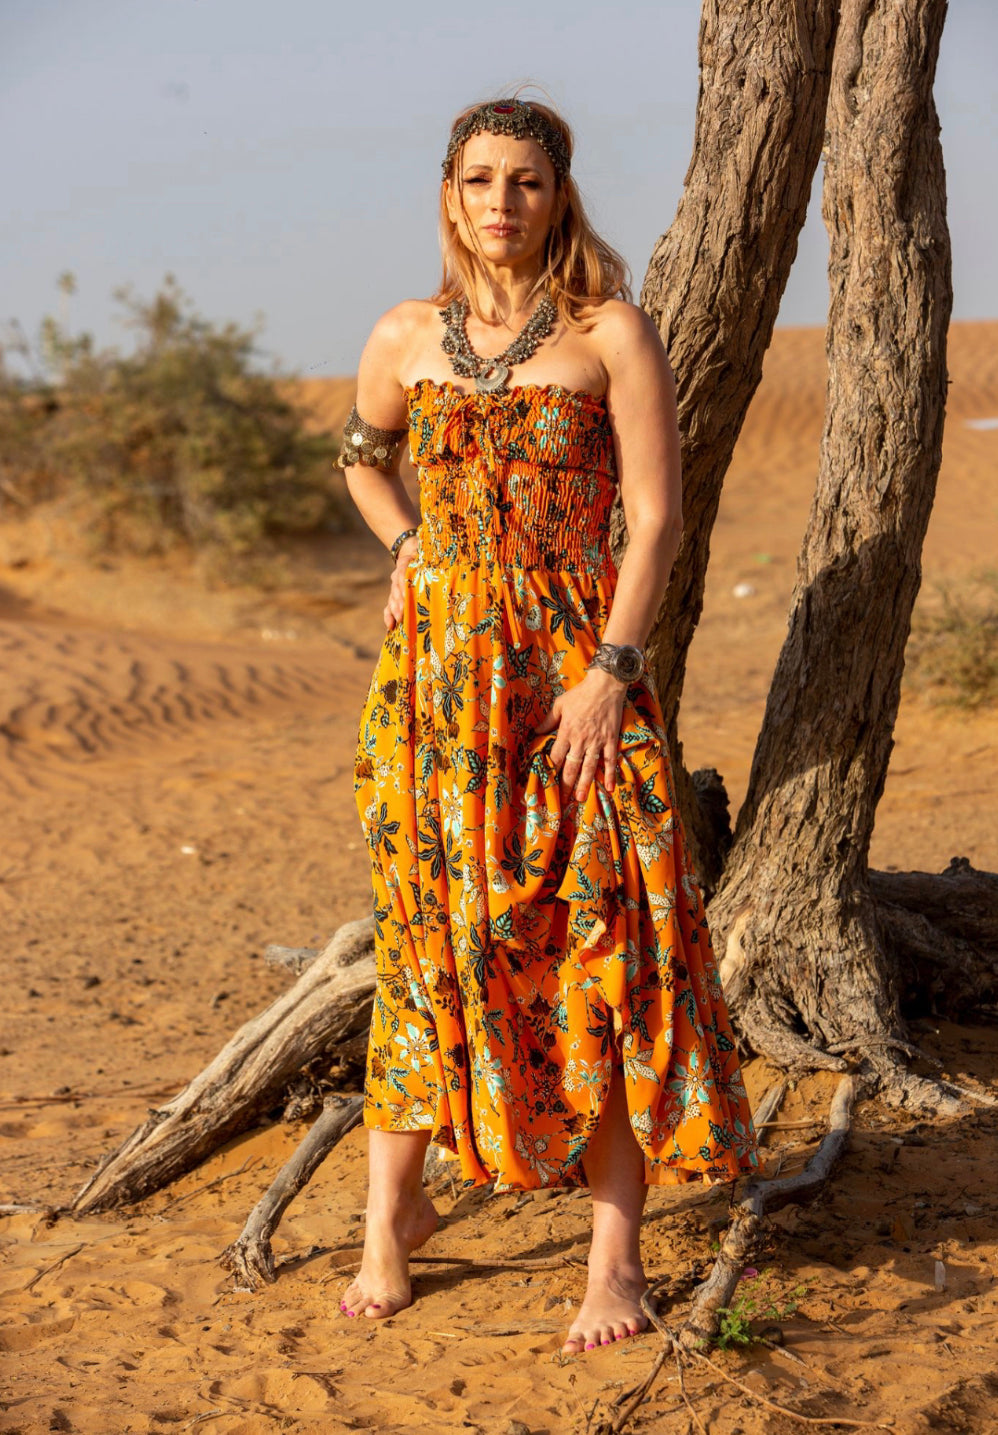 Sunsets in paradise butterfly dress/skirt